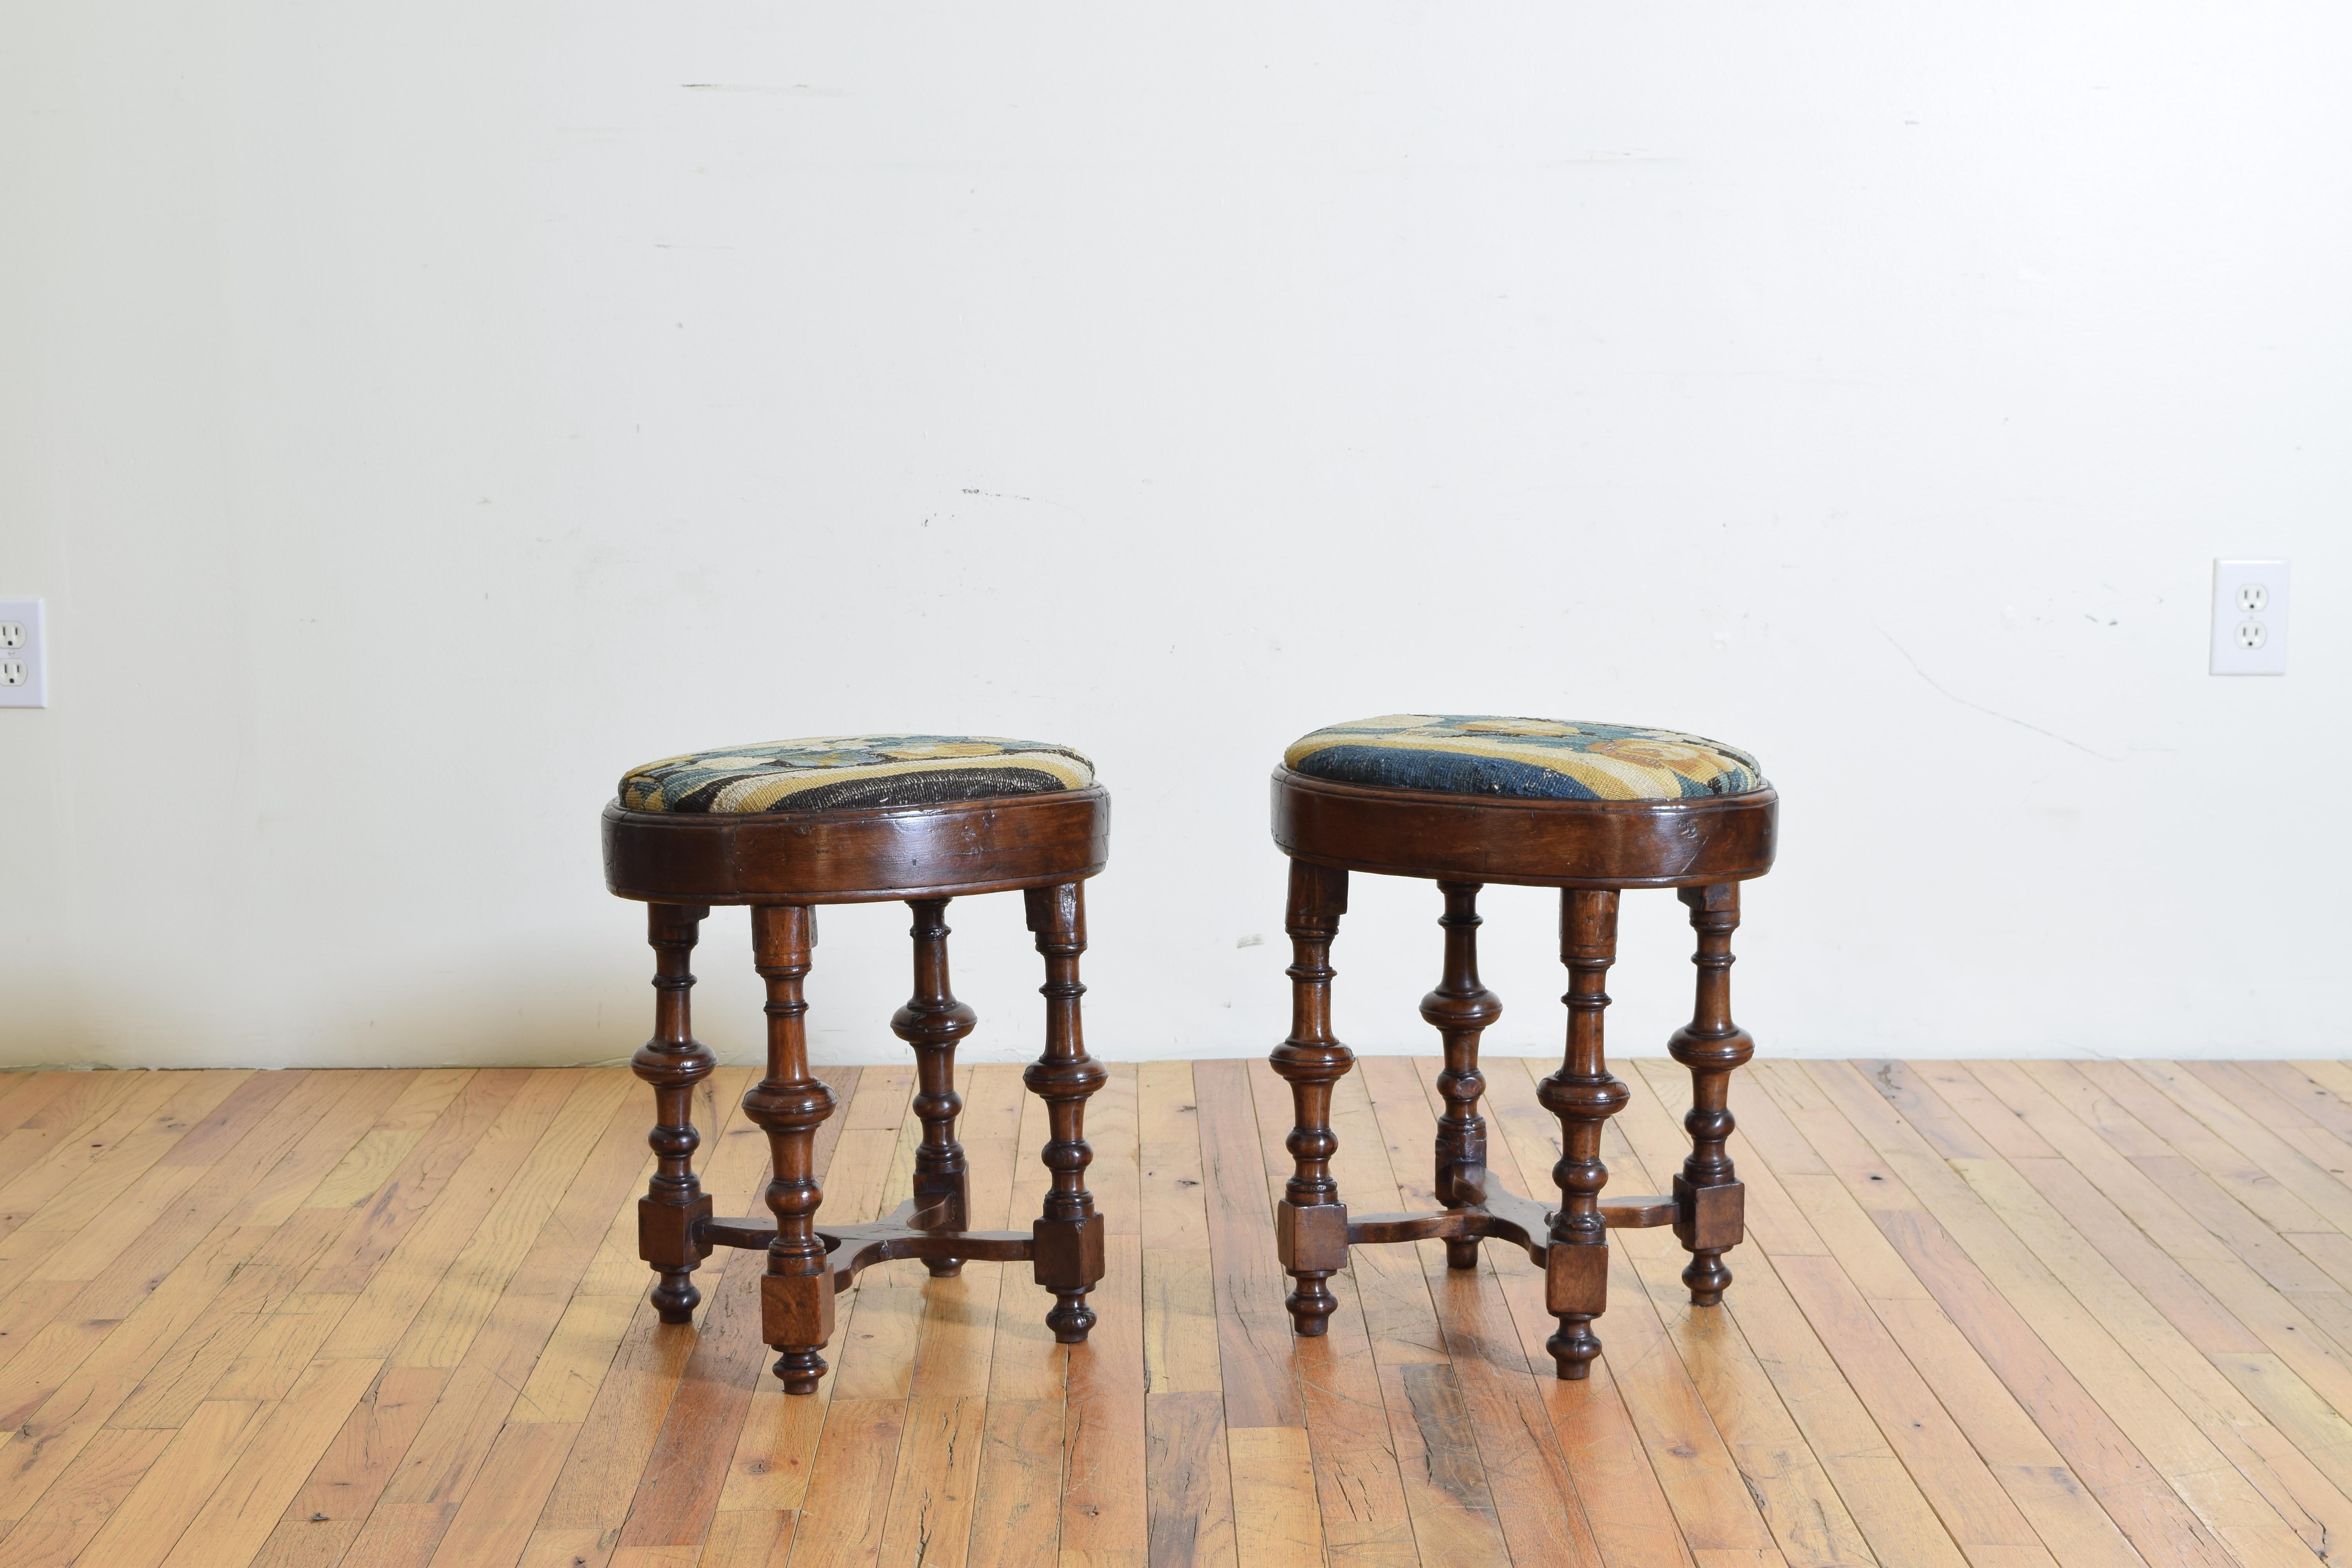 Likely Tuscan in origin these stools have oval shaped tops with drop in tapestry upholstered seats, raised on turned and block legs joined by X-form stretchers.